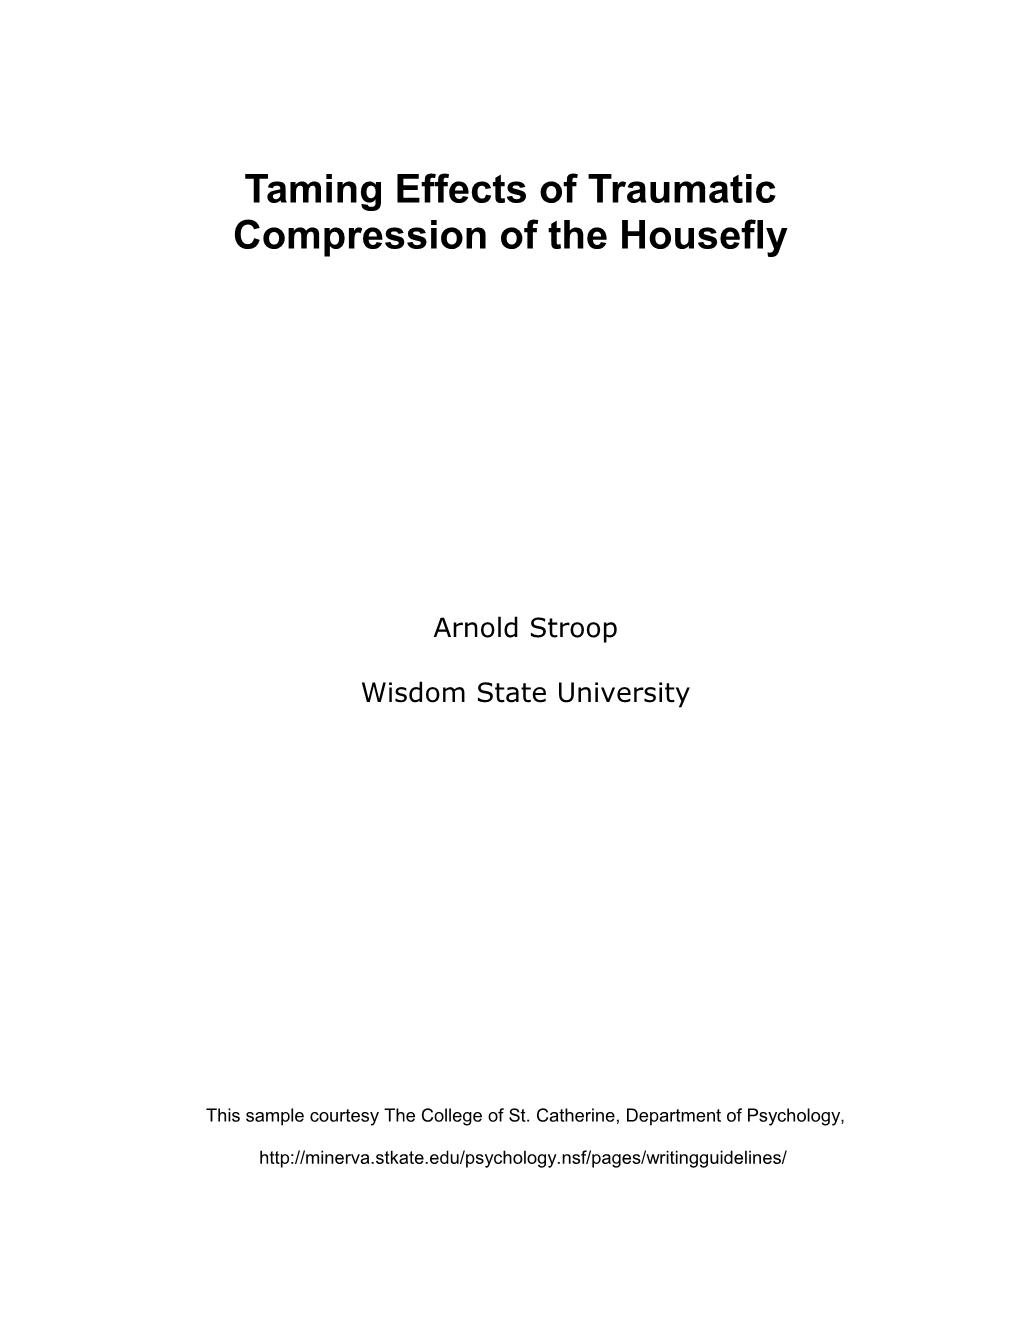 Taming Effects of Traumatic Compression of the House Fly